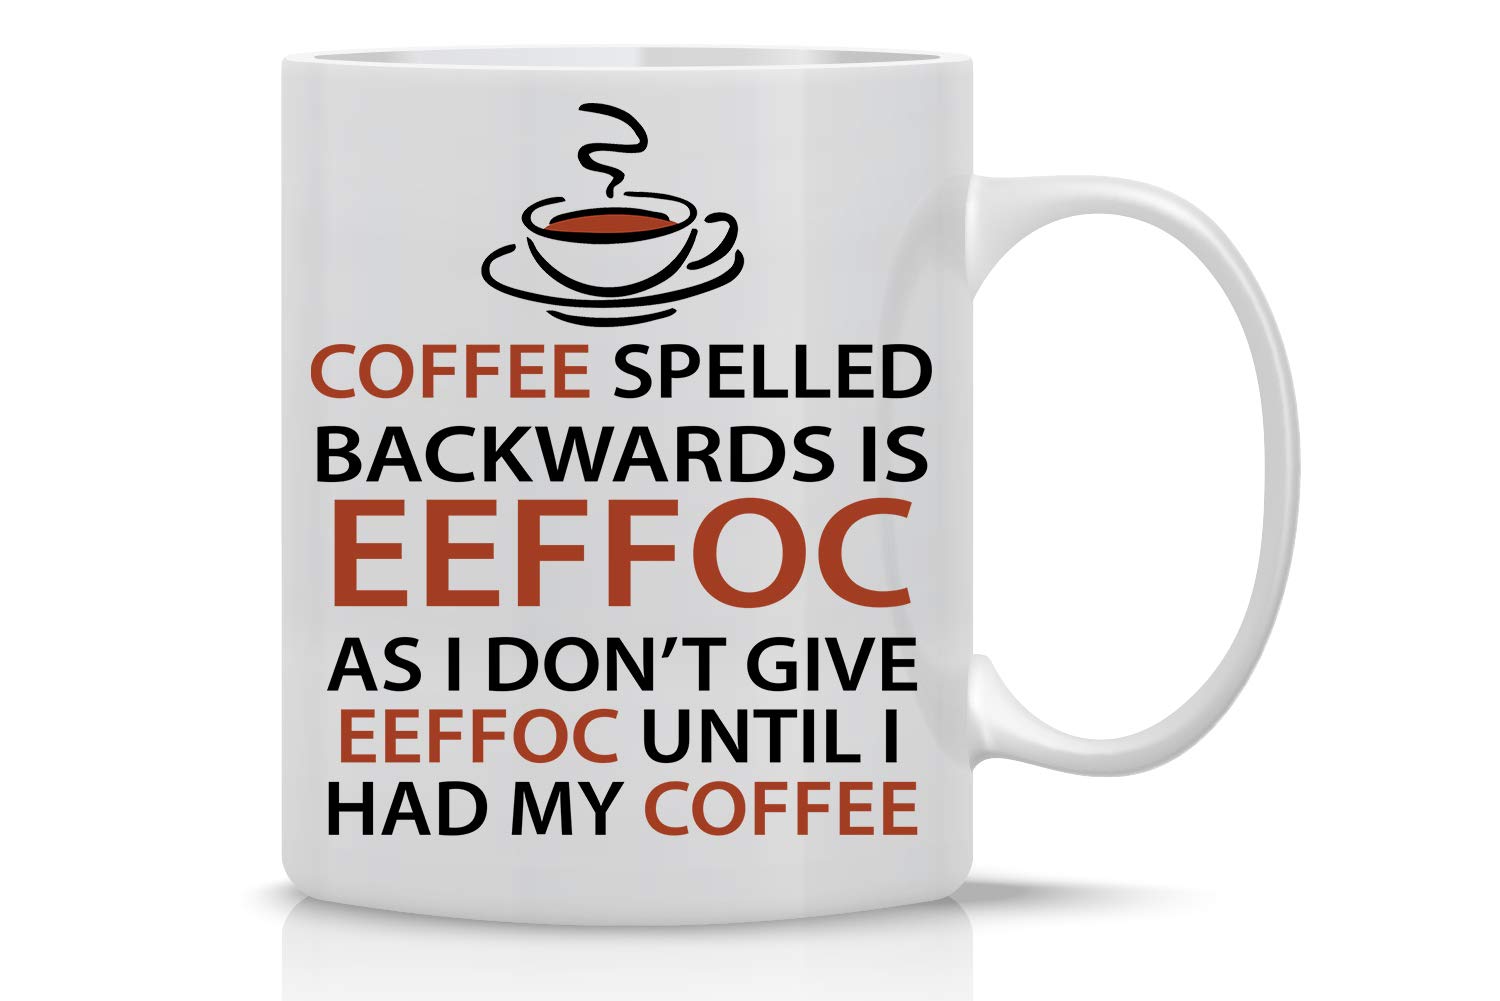 Book Cover Eeffoc Is Coffee Spelled Backwards, As I Dont Give Eeffoc Until I Had My Coffee - Funny Coffee Mug - 11OZ Coffee Mug - Mugs For Women, Boss, Friend, Employee, or Spouse - Perfect Birthday Idea